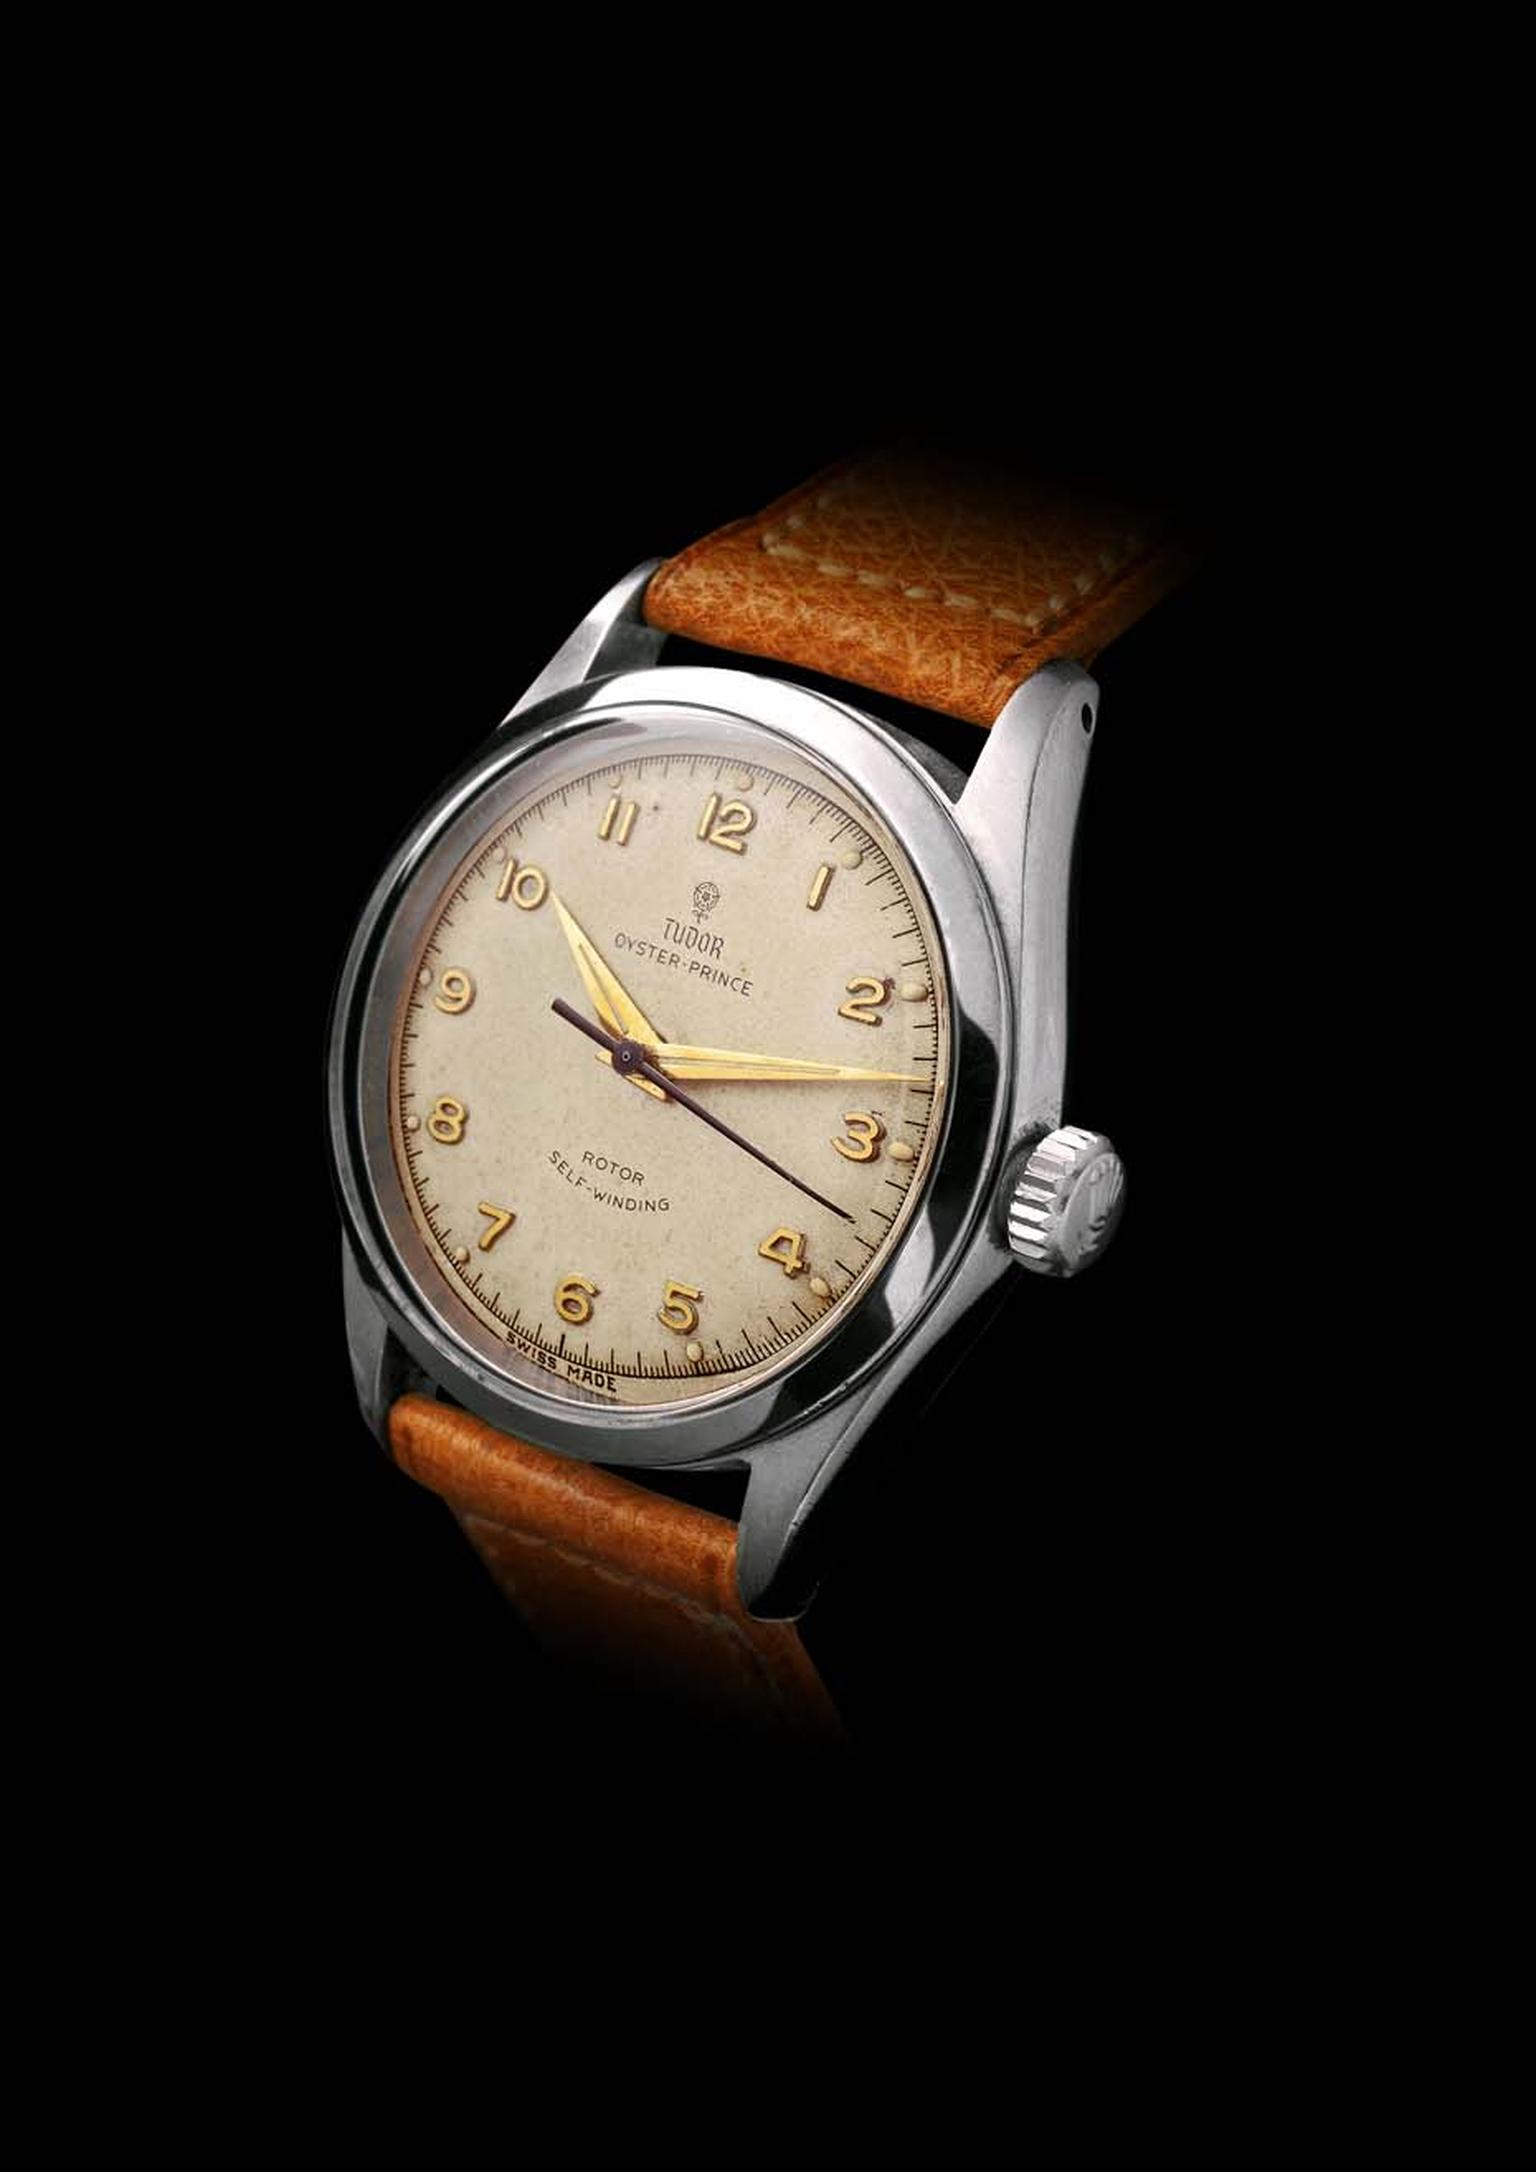 The Tudor Oyster Prince watch of 1952. A similar watch was given to 26 members of the British North Greenland Expedition to brave the extreme conditions of the Arctic.